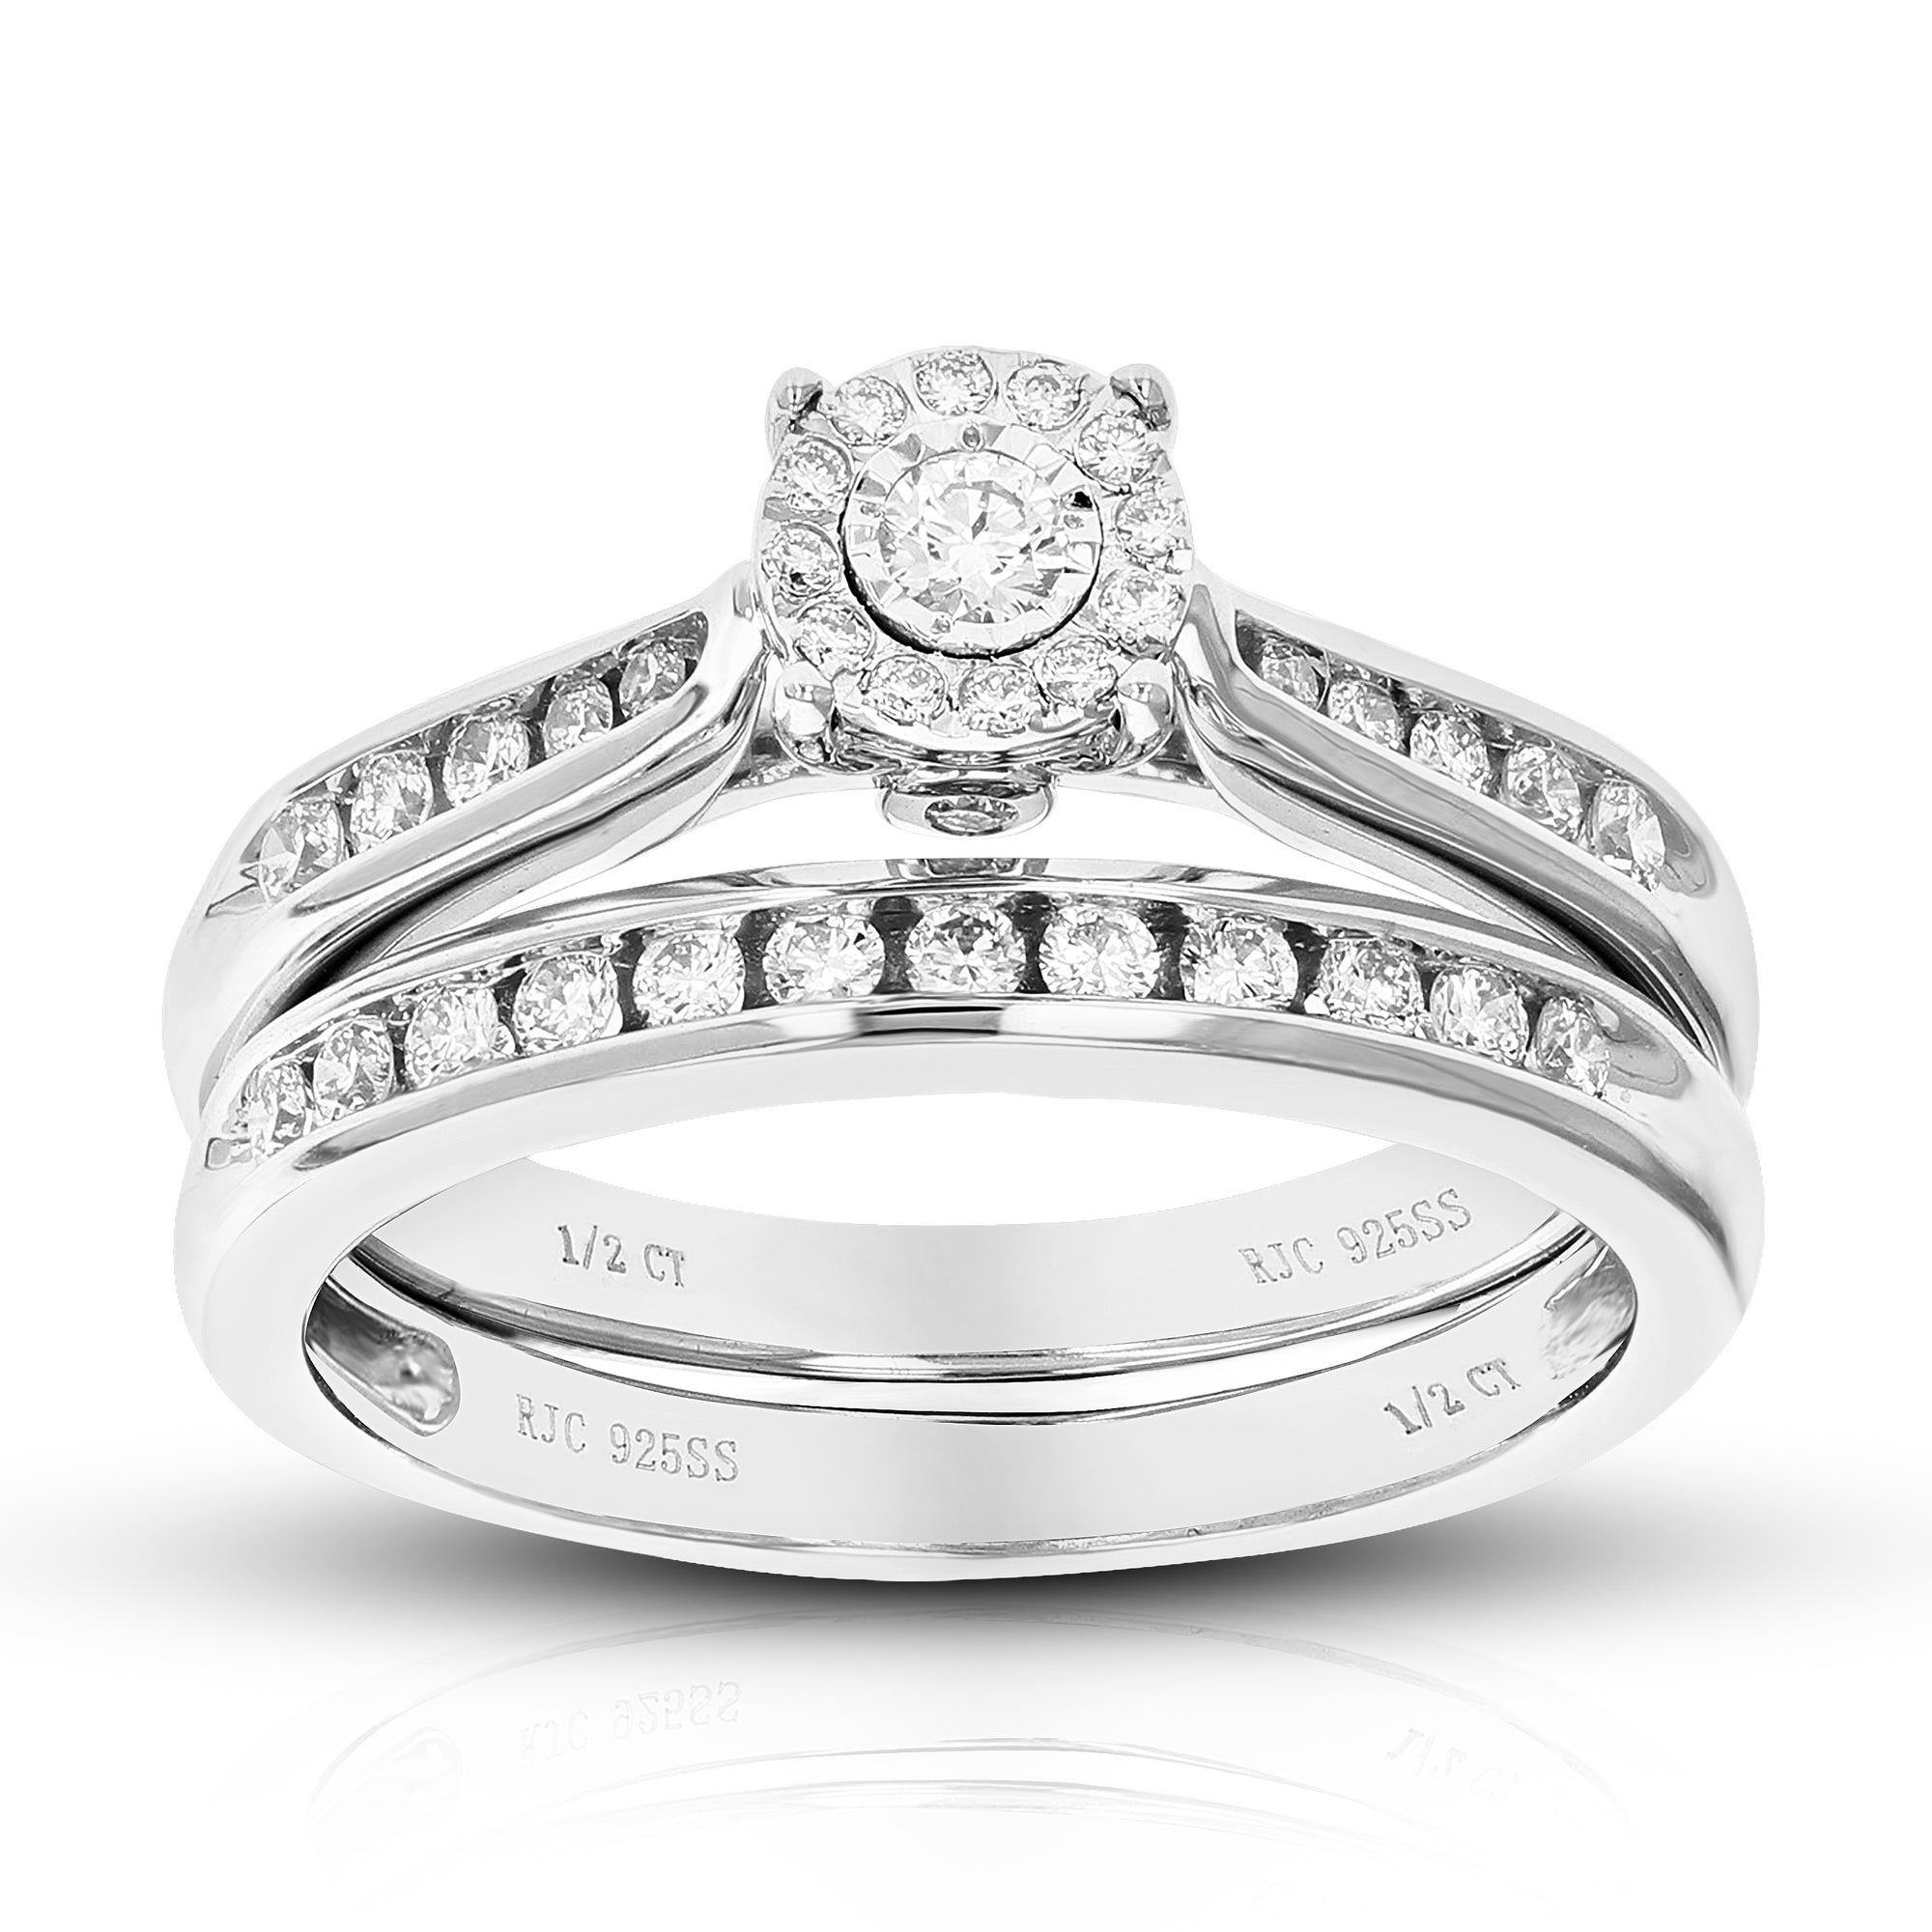 1/2 cttw Wedding Engagement Ring Bridal Set, Round Lab Grown Diamond Ring for Women in .925 Sterling Silver, Prong Setting, Size 6-8